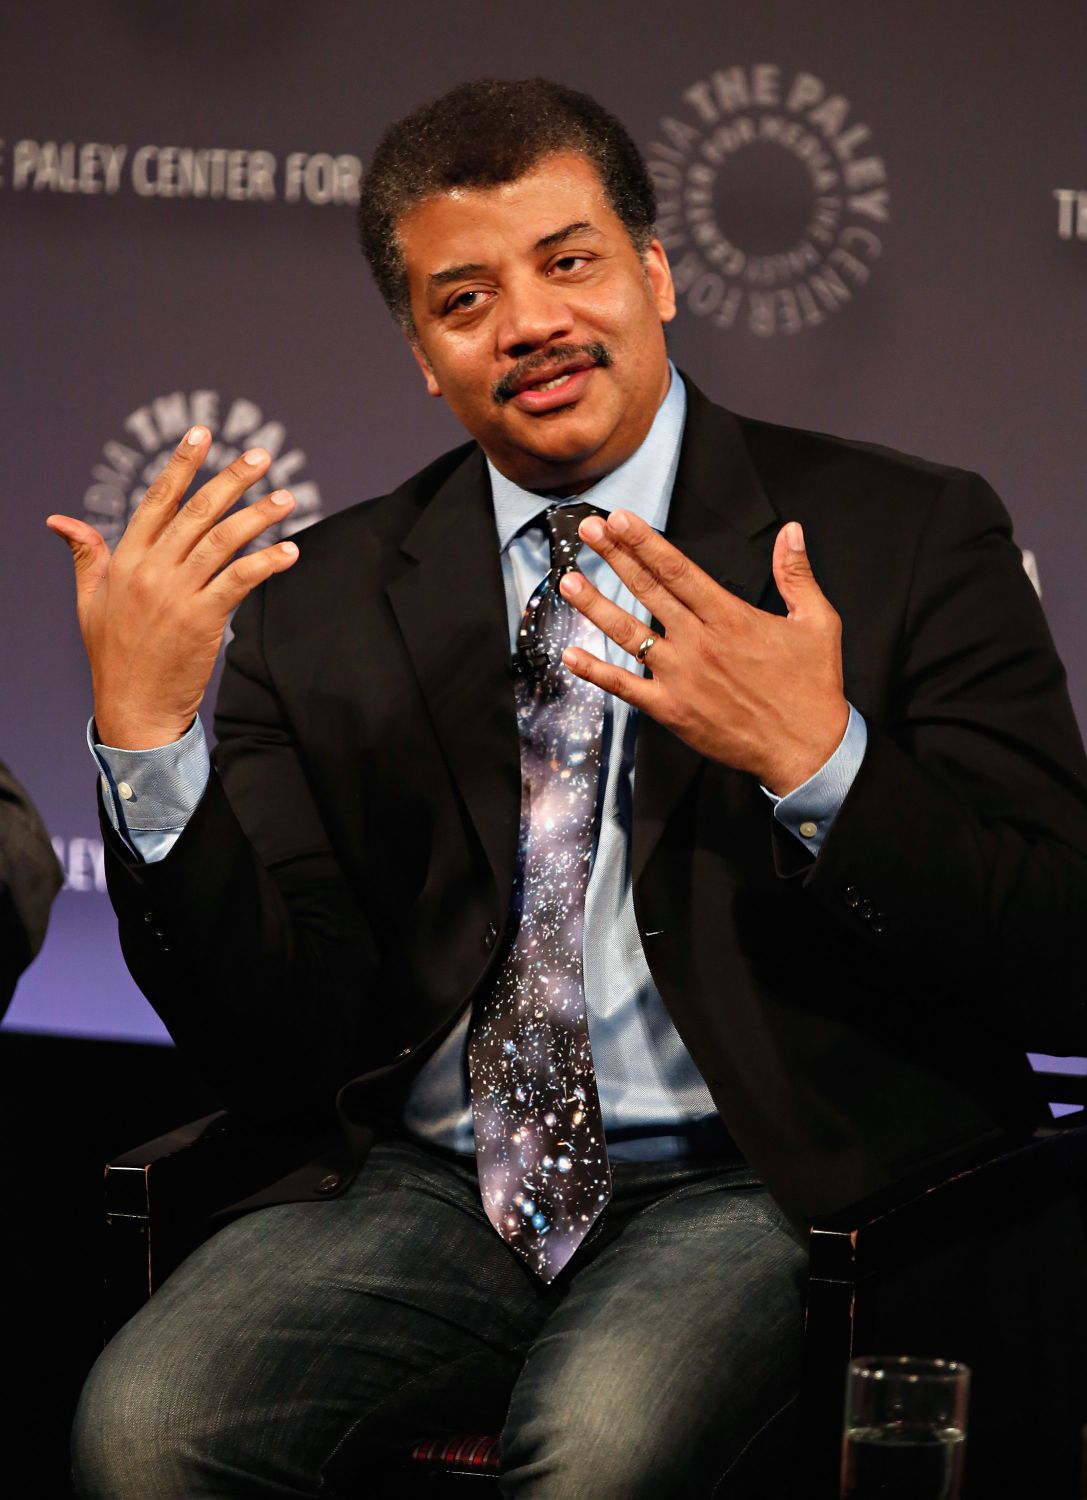 This photo shows Neil DeGrasse Tyson, who, according to some, is the most famous scientist in the United States.